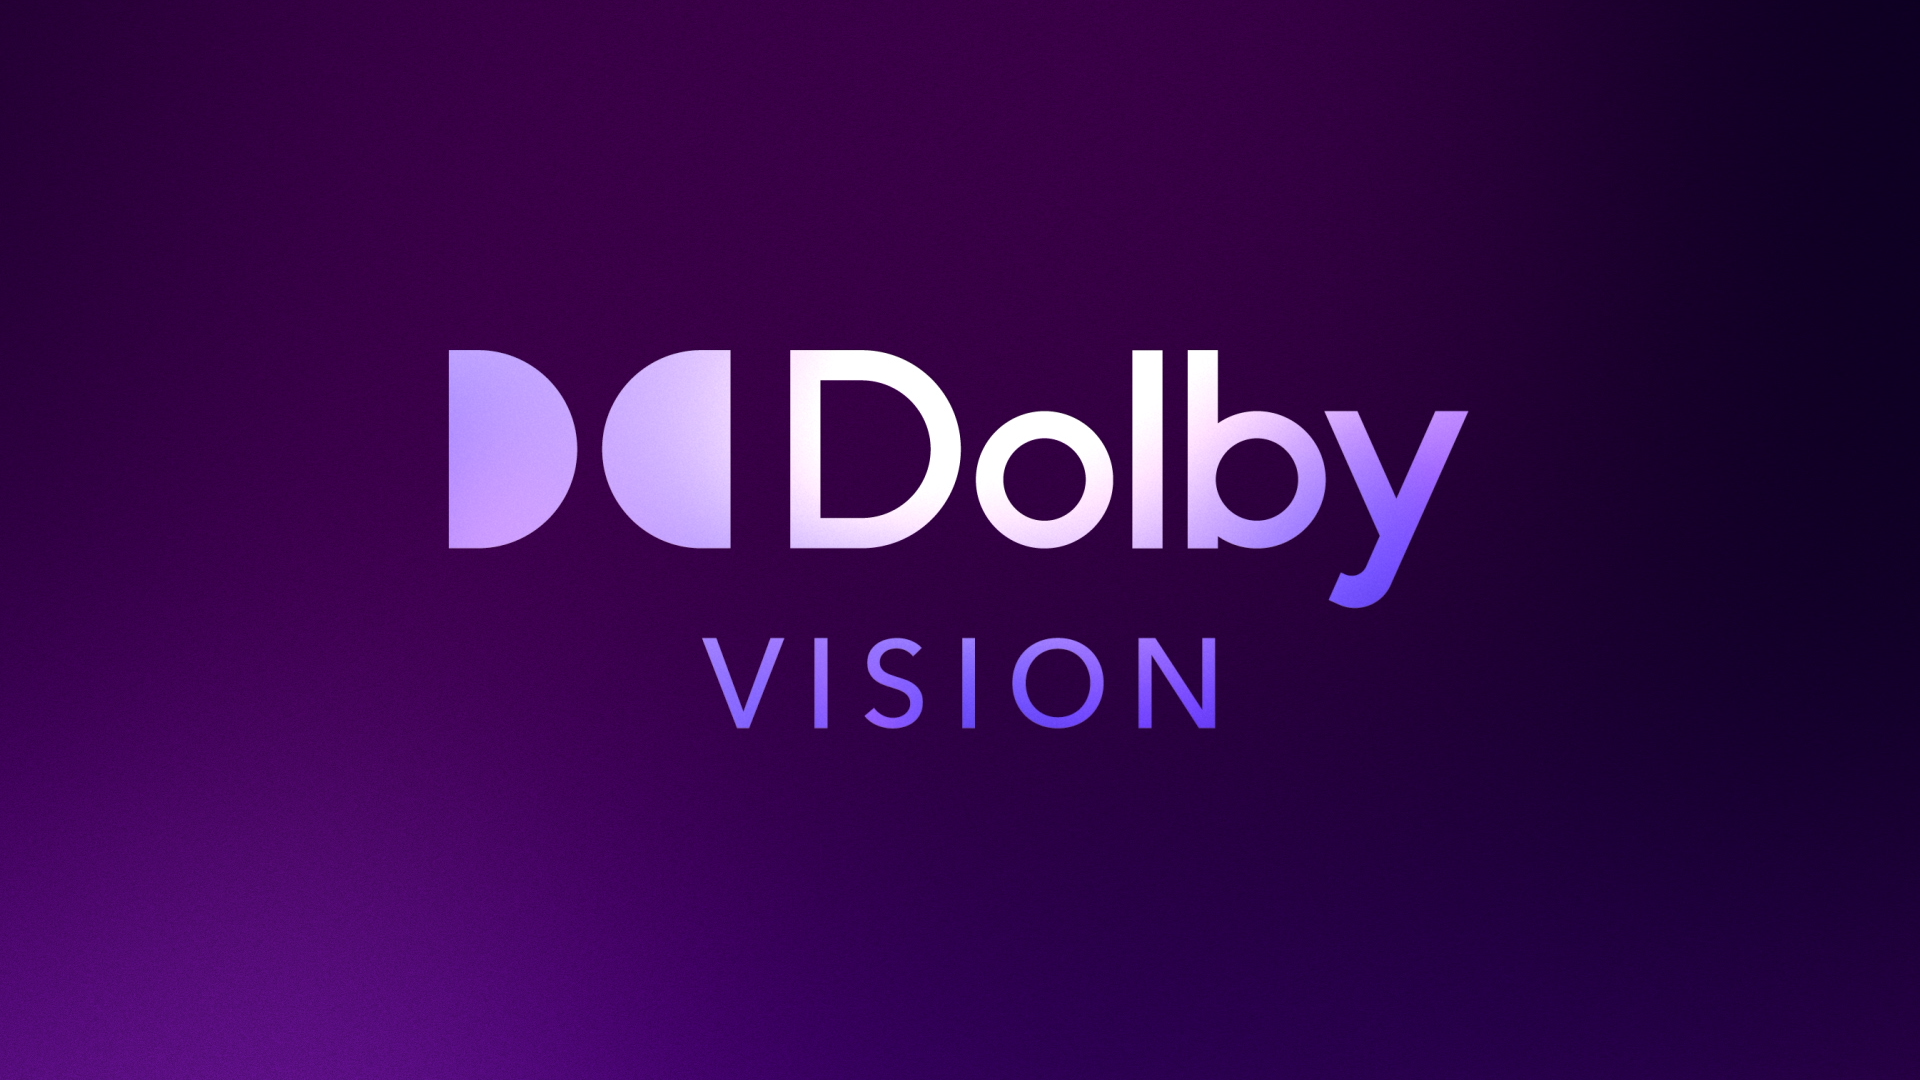 DolbyHome_Branding Element_Dolby Vision_FINAL_ProRes4444 (0-00-02-15).png